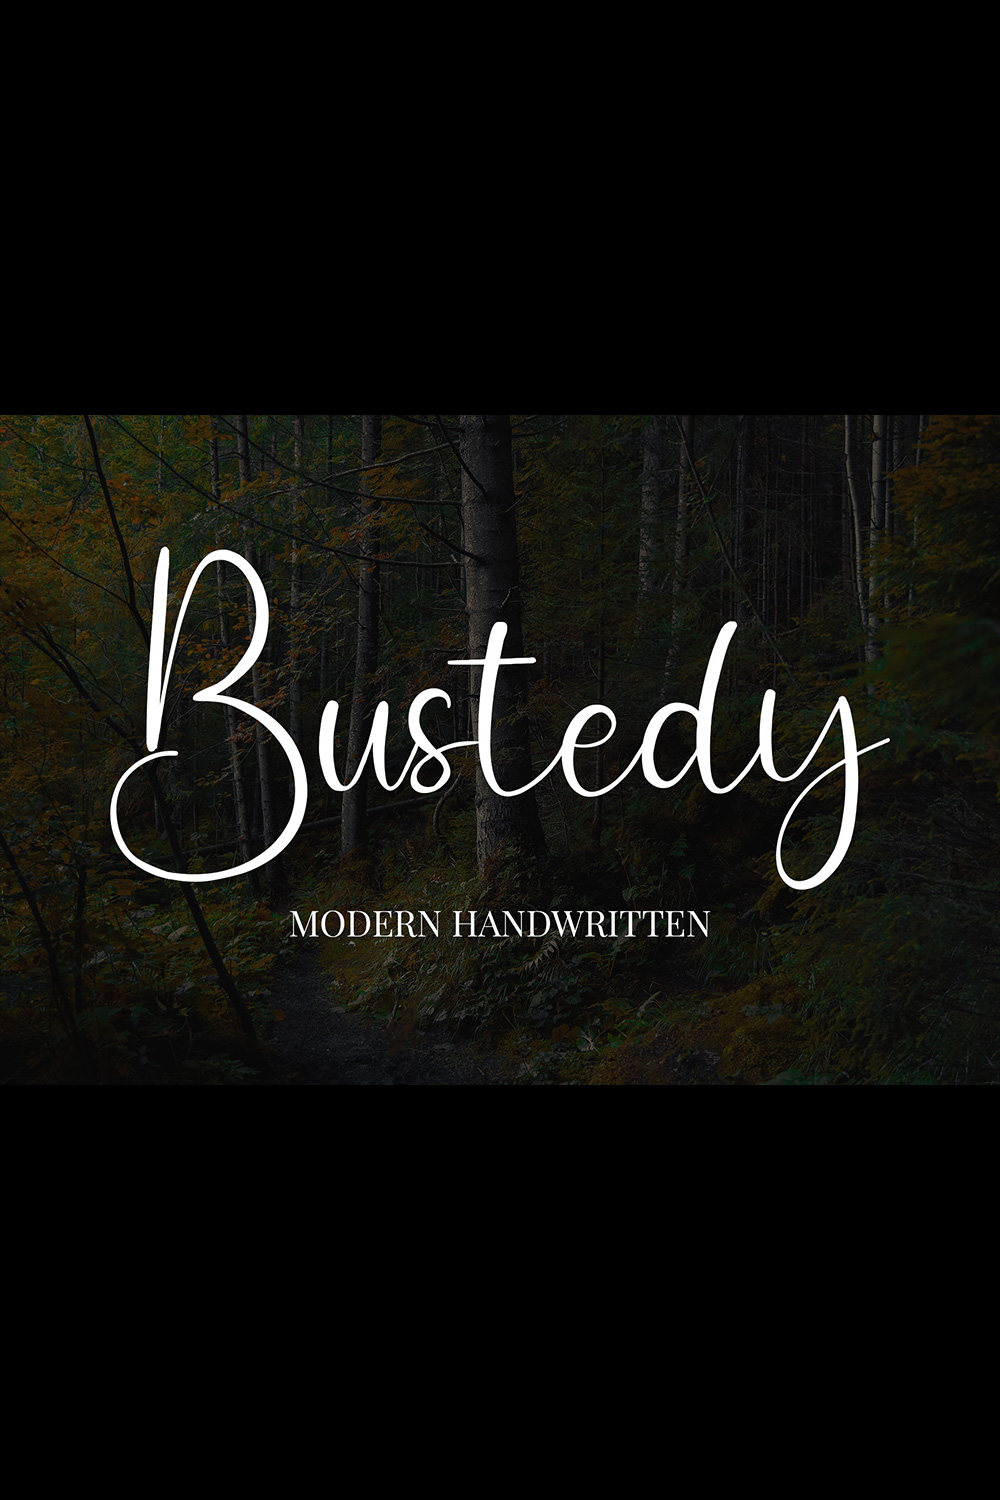 An image with text showing the irresistible Bustedy font